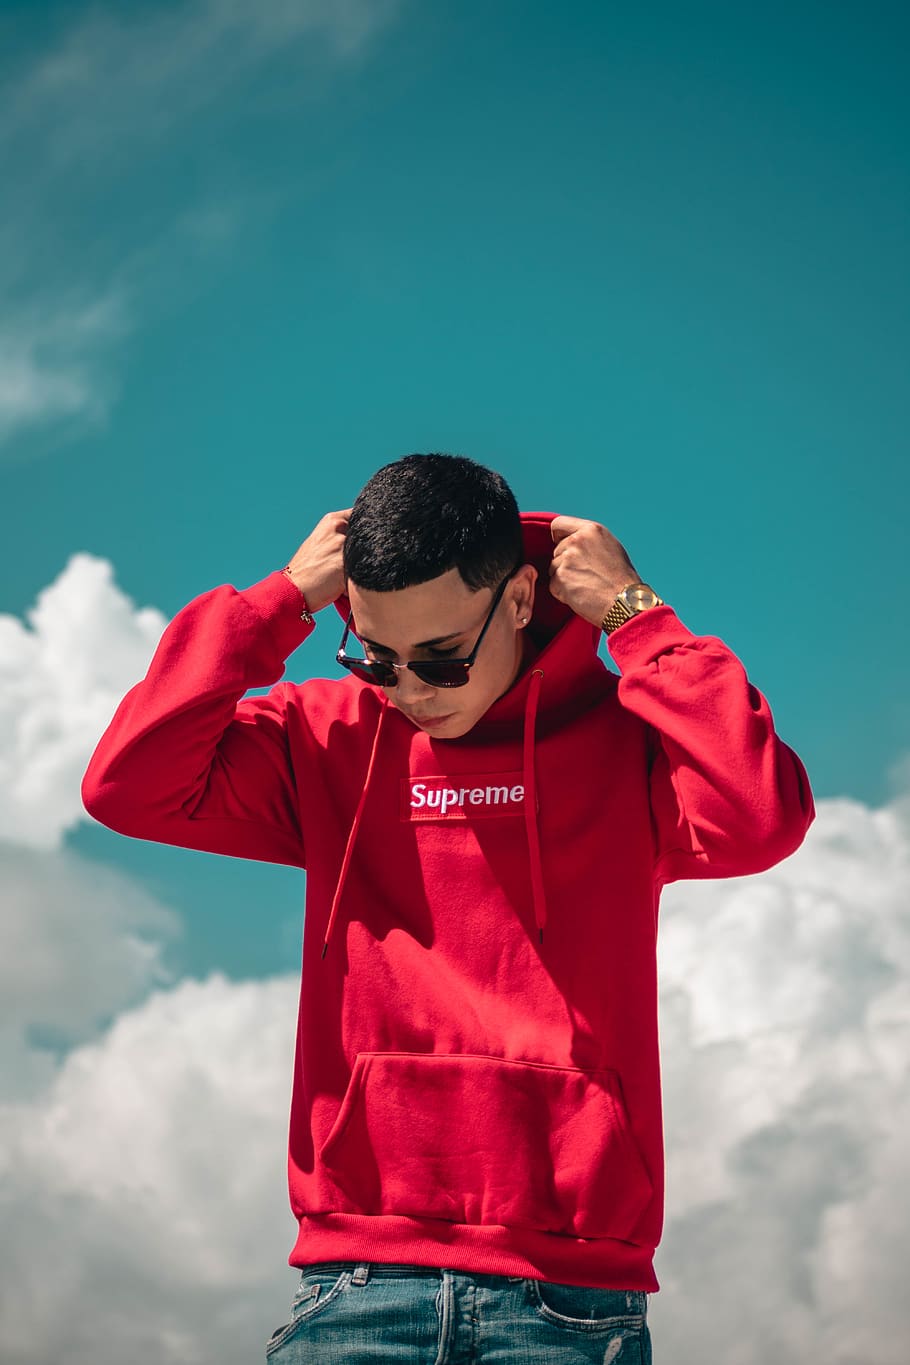 Download Hd Wallpaper Man Wearing Red Supreme Pullover Hoodie Sky Front View One Person Wallpaper Flare